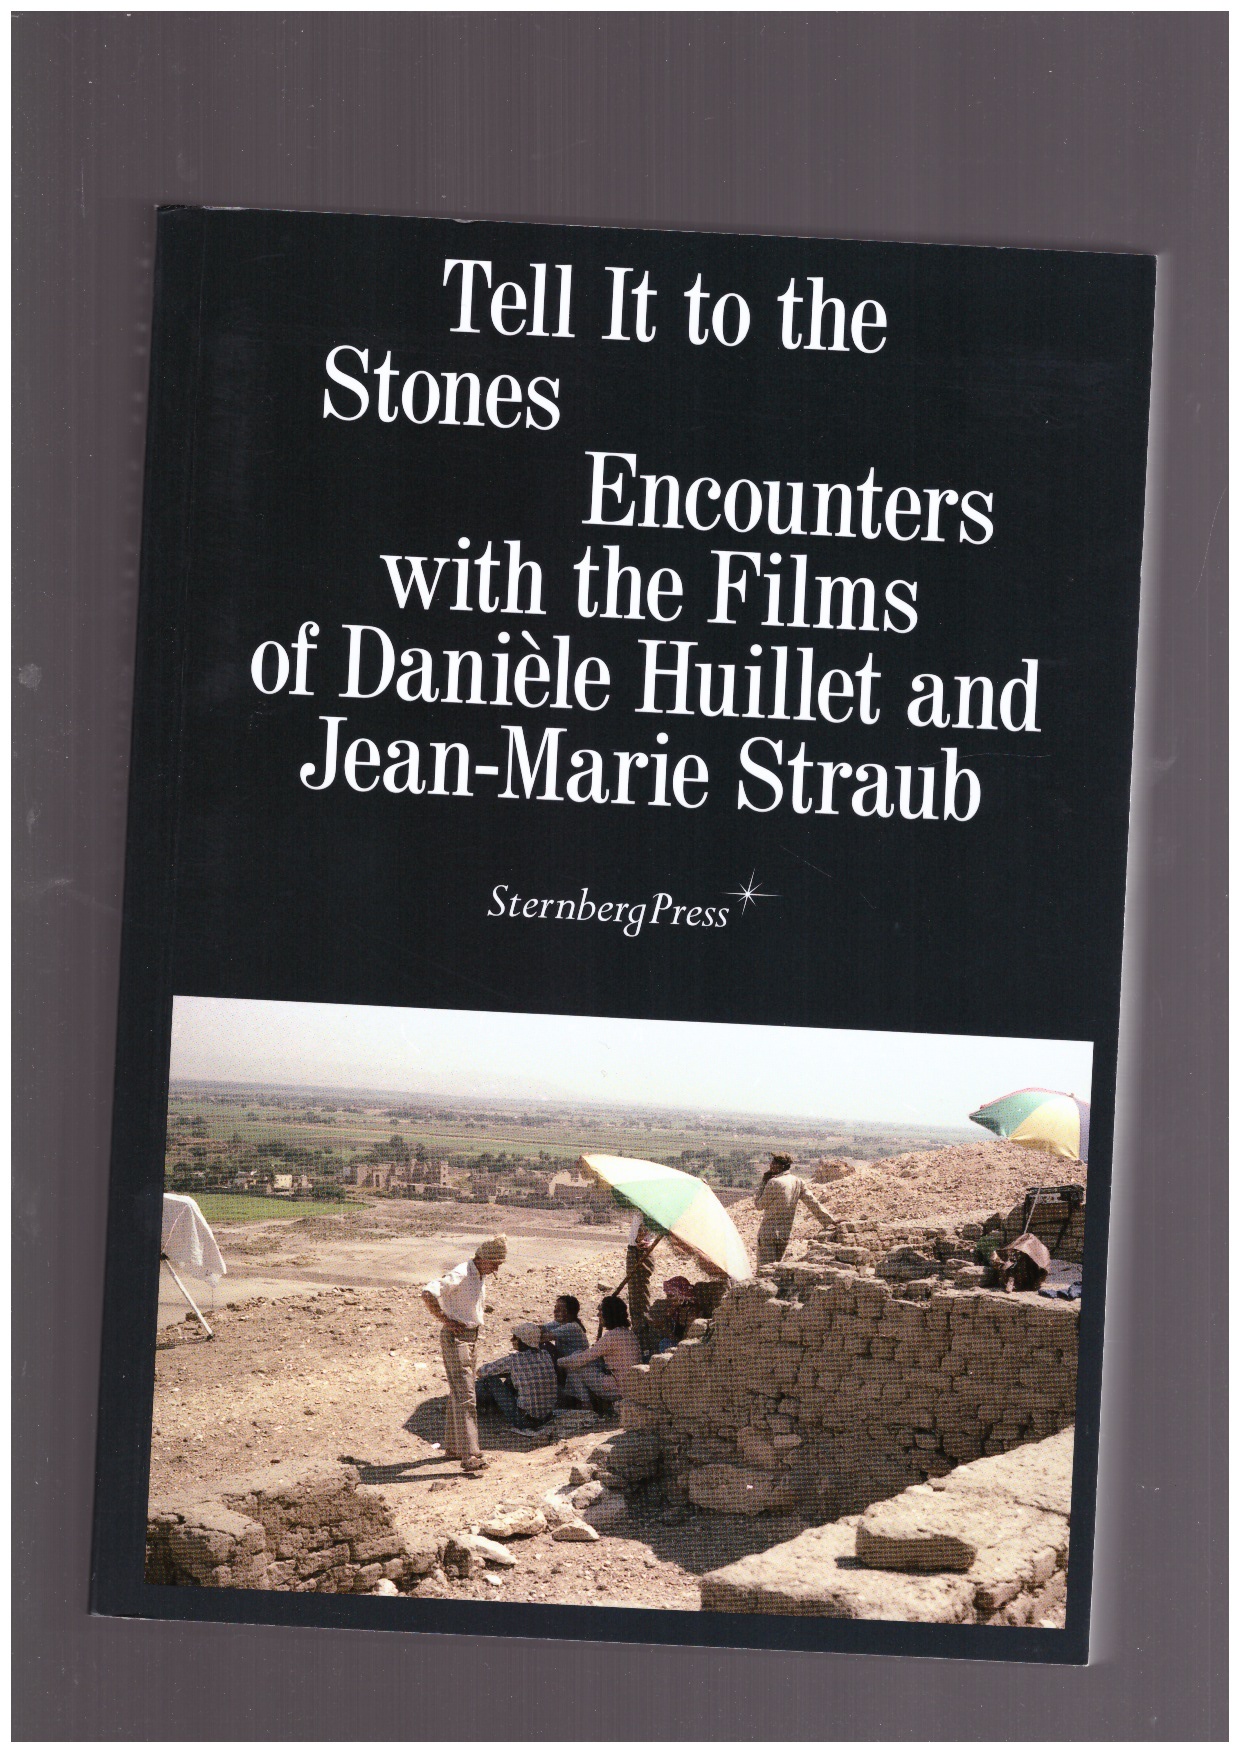 BUSCH, Annett; HERING, Tobias (eds.) - Tell It to the Stones. Encounters with the Films of Danièle Huillet and Jean-Marie Straub